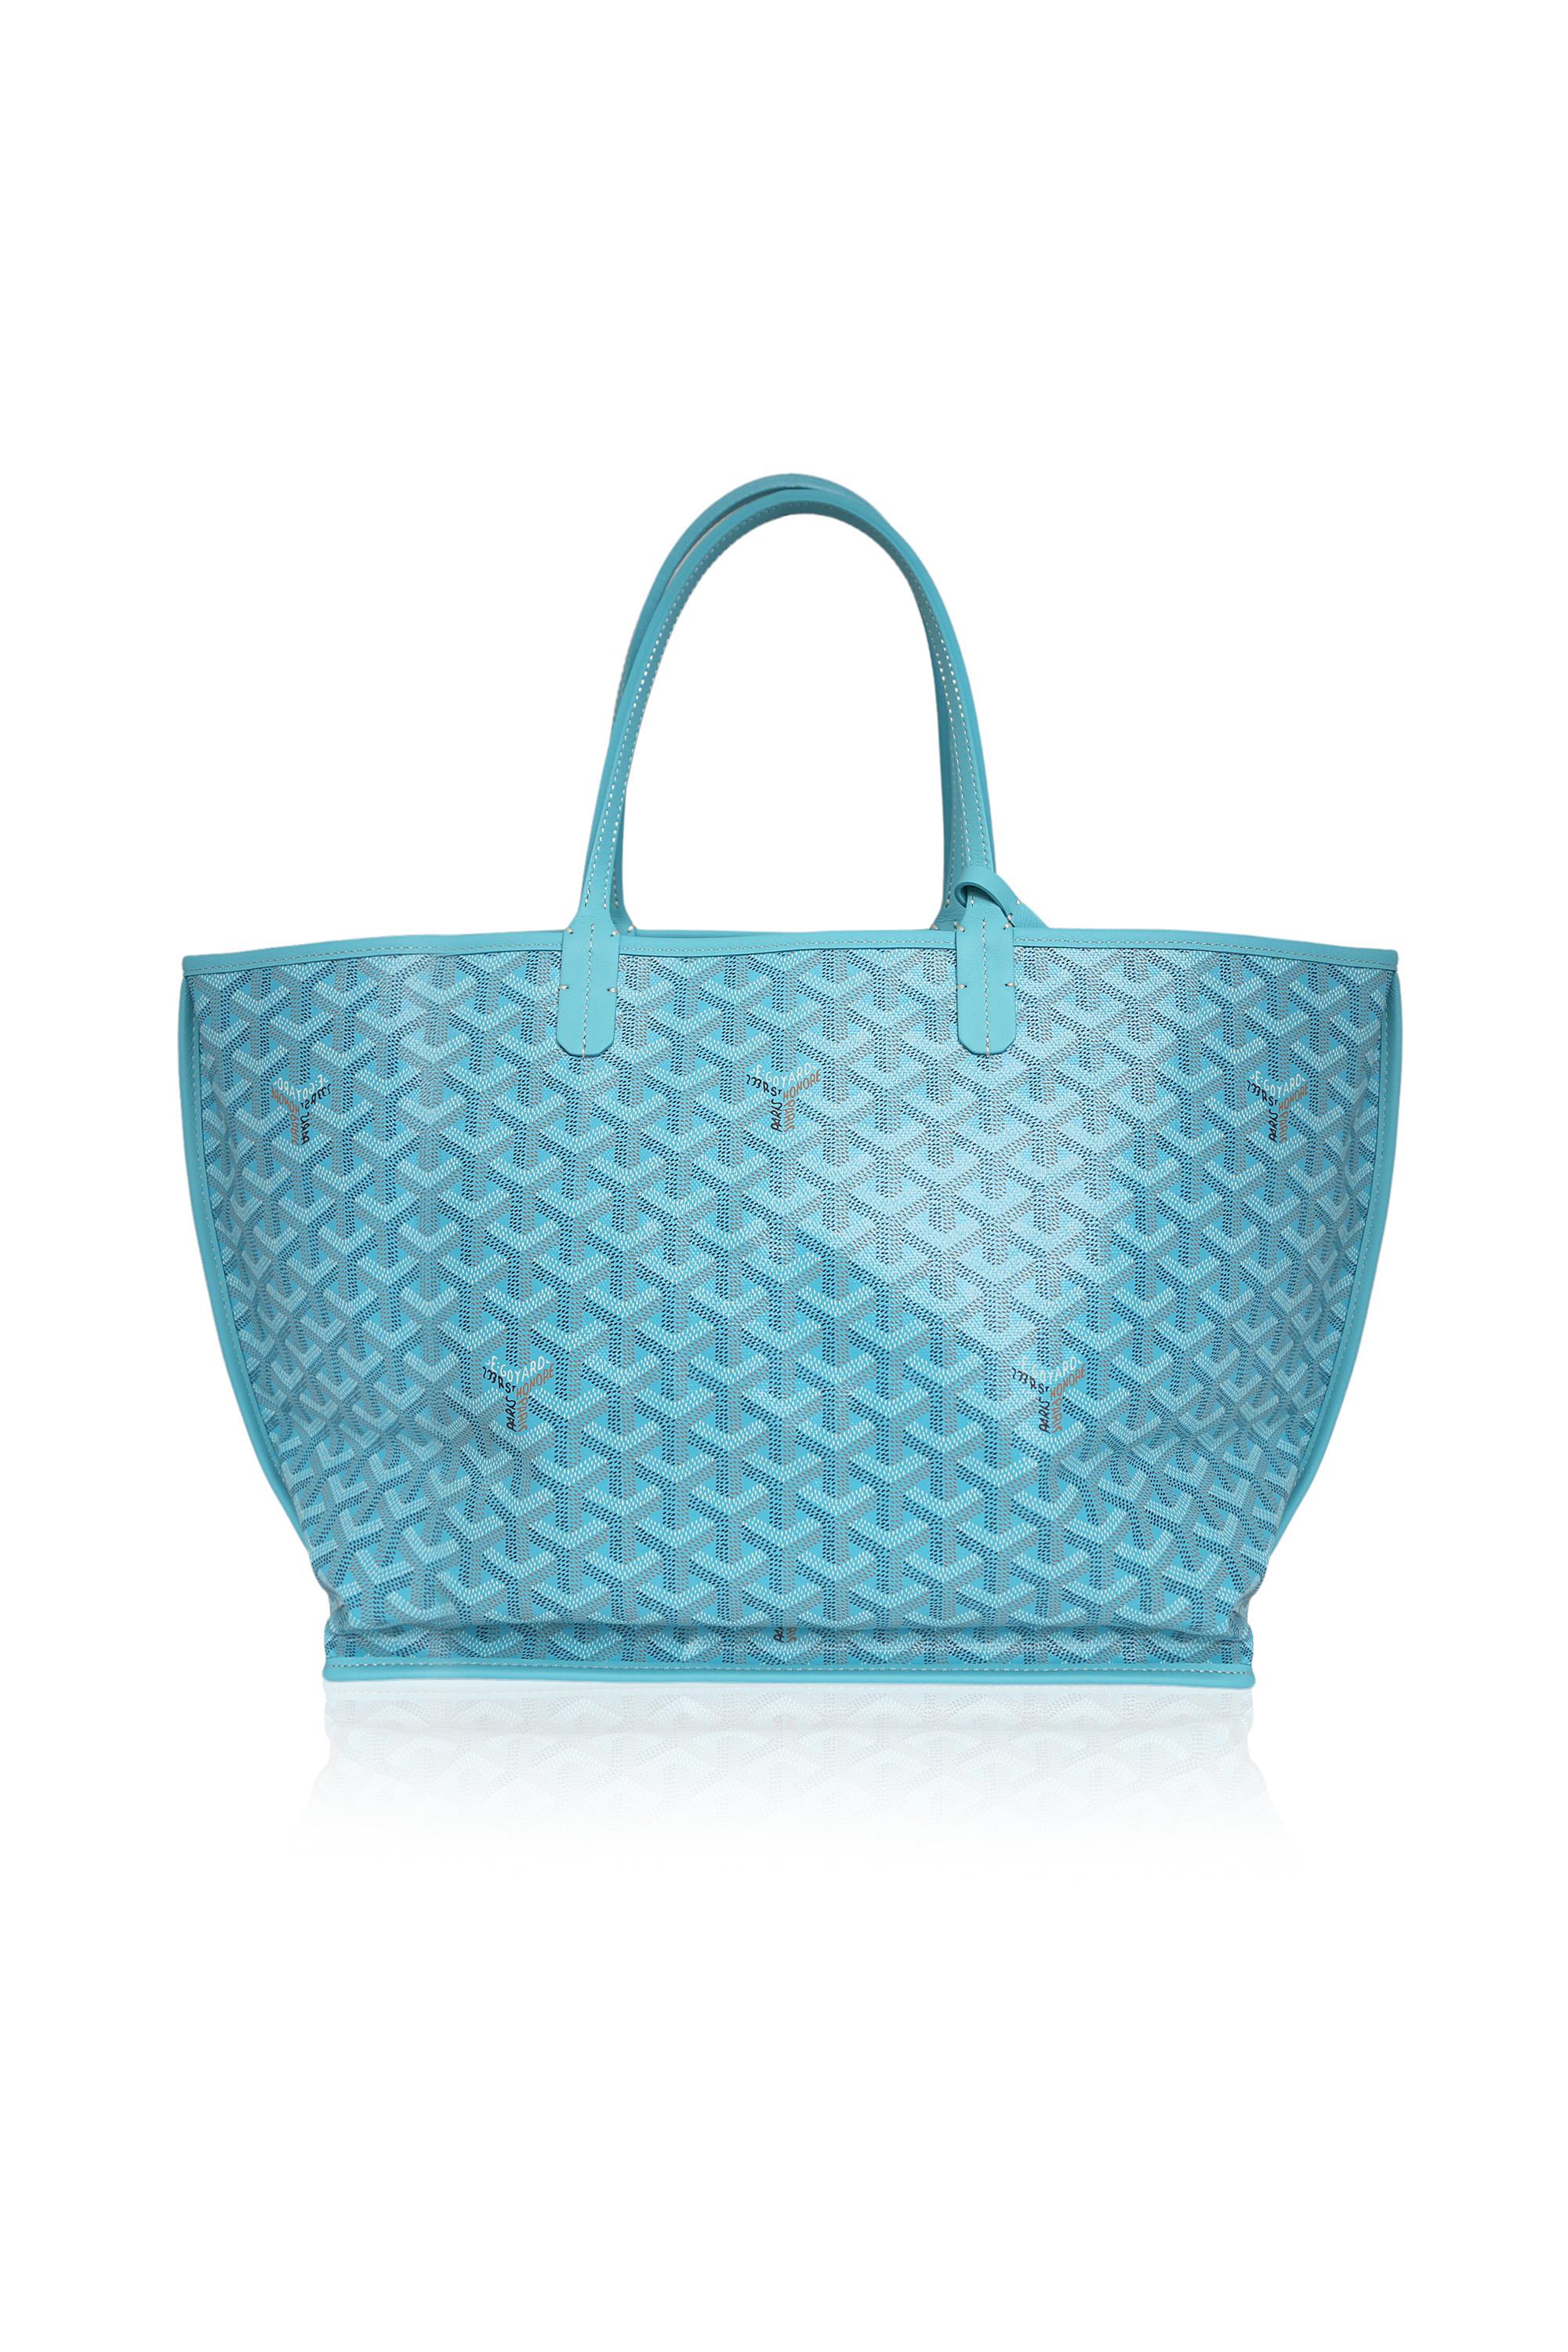 This limited-edition turquoise Goyard Anjou Seahorse Bag is Saint Louis reinterpreted. Reversible and versatile, with Goyardine canvas on one side and leather on the other. The intricate embroidery design showcases two seahorses, a symbol of